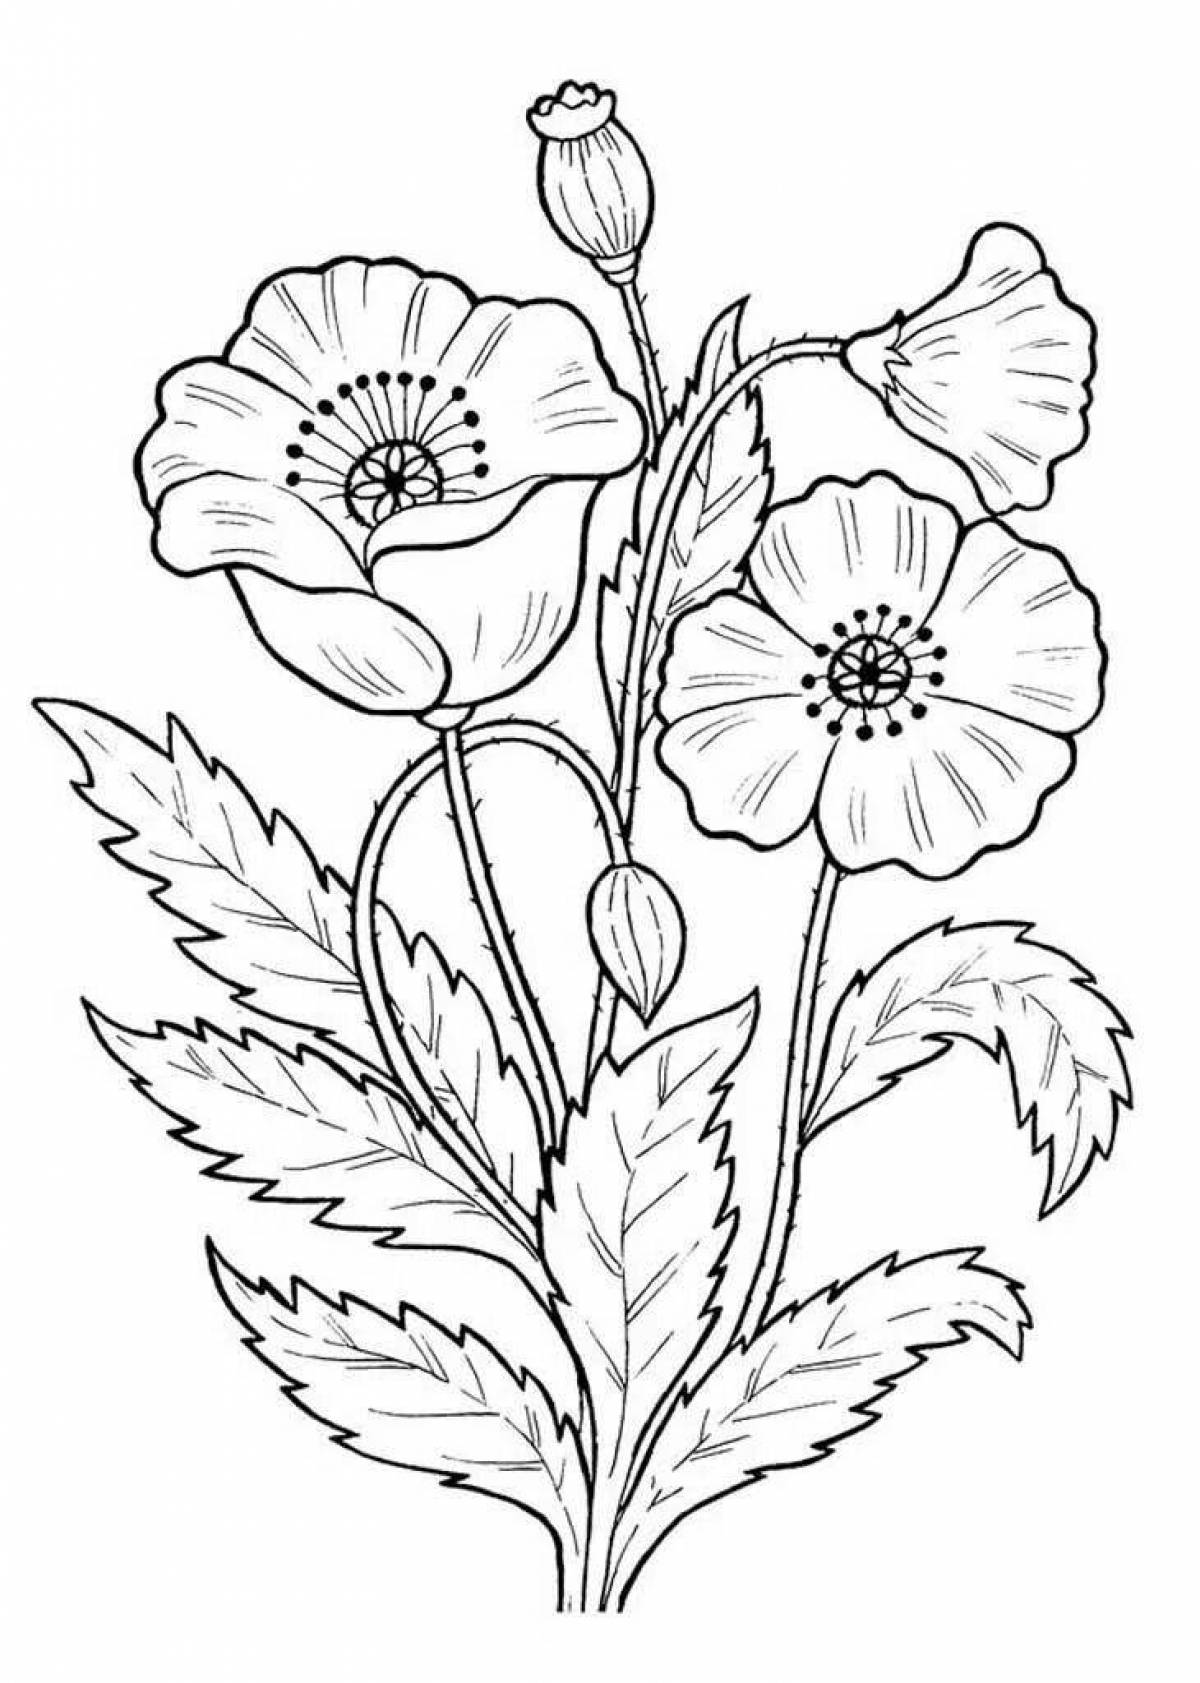 Playful coloring drawing of flowers